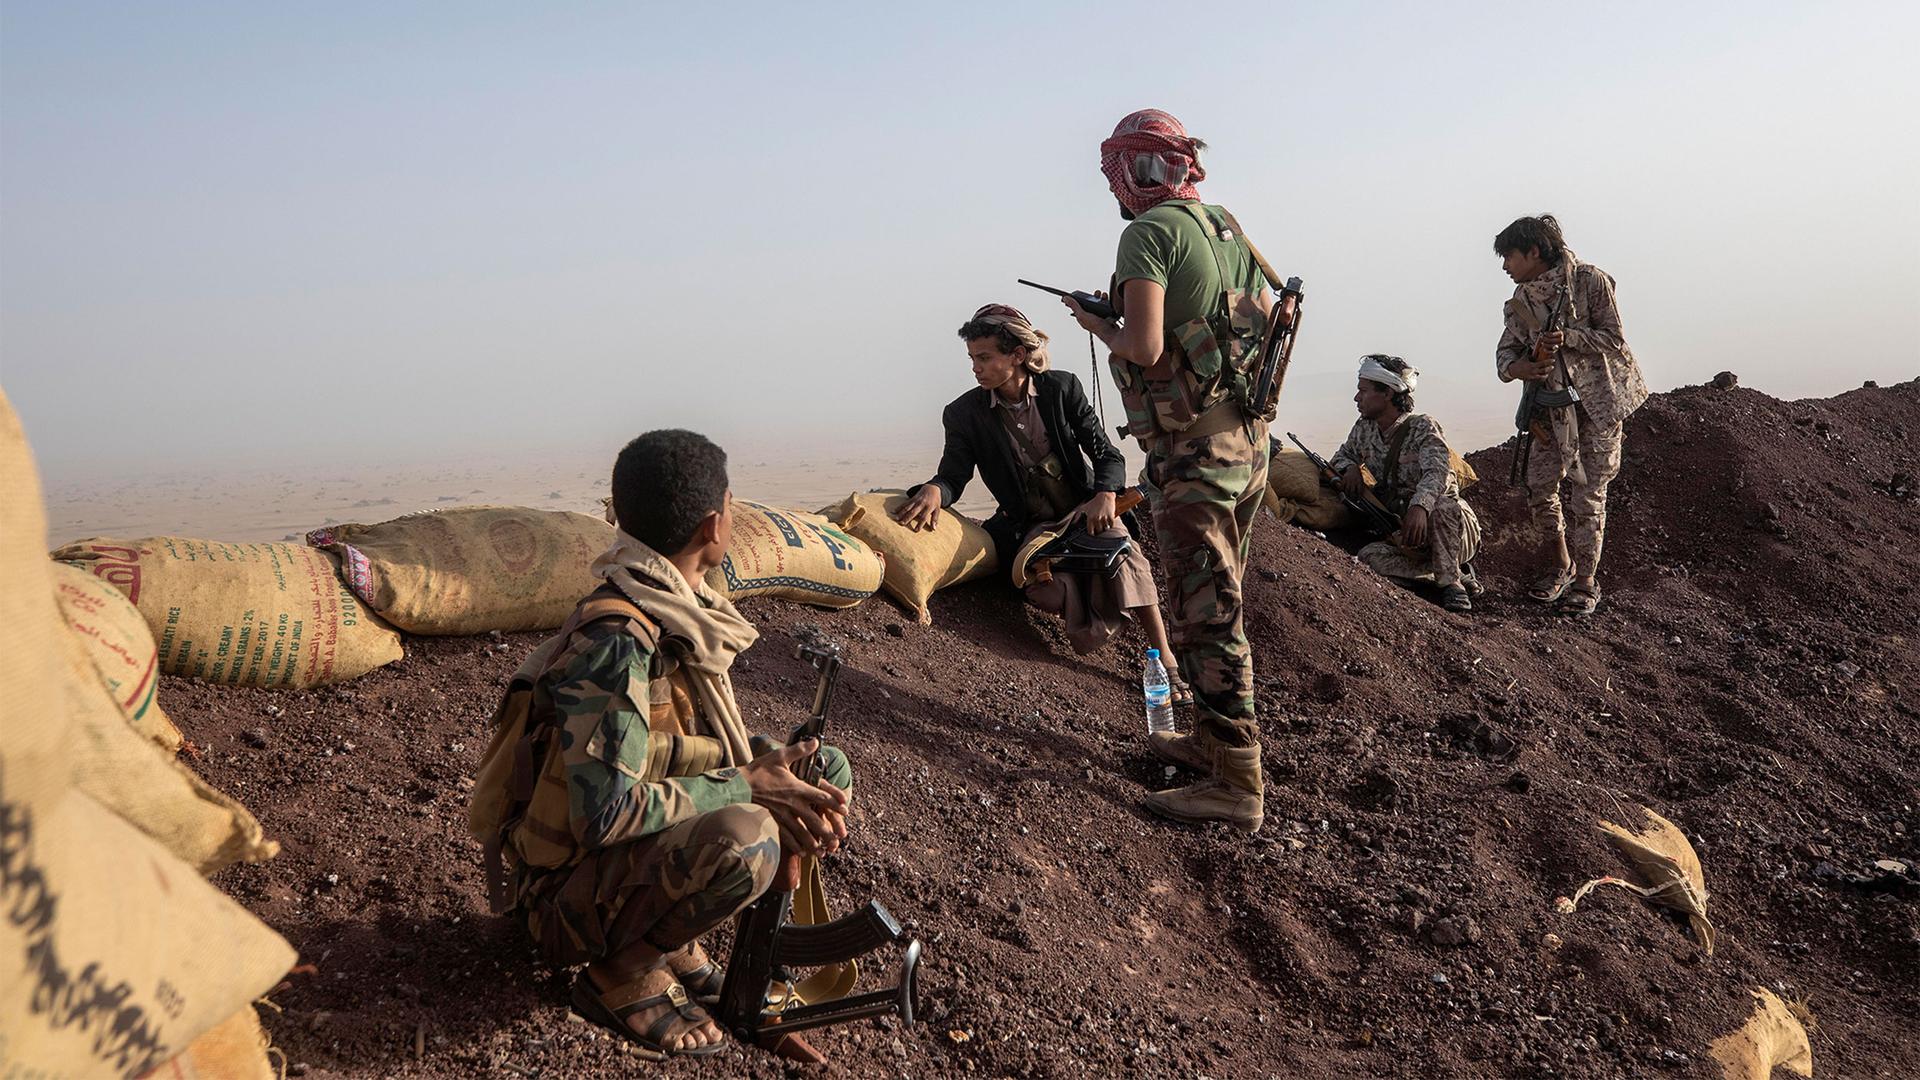 Yemeni fighters look over a mound of soil lined with sandbags